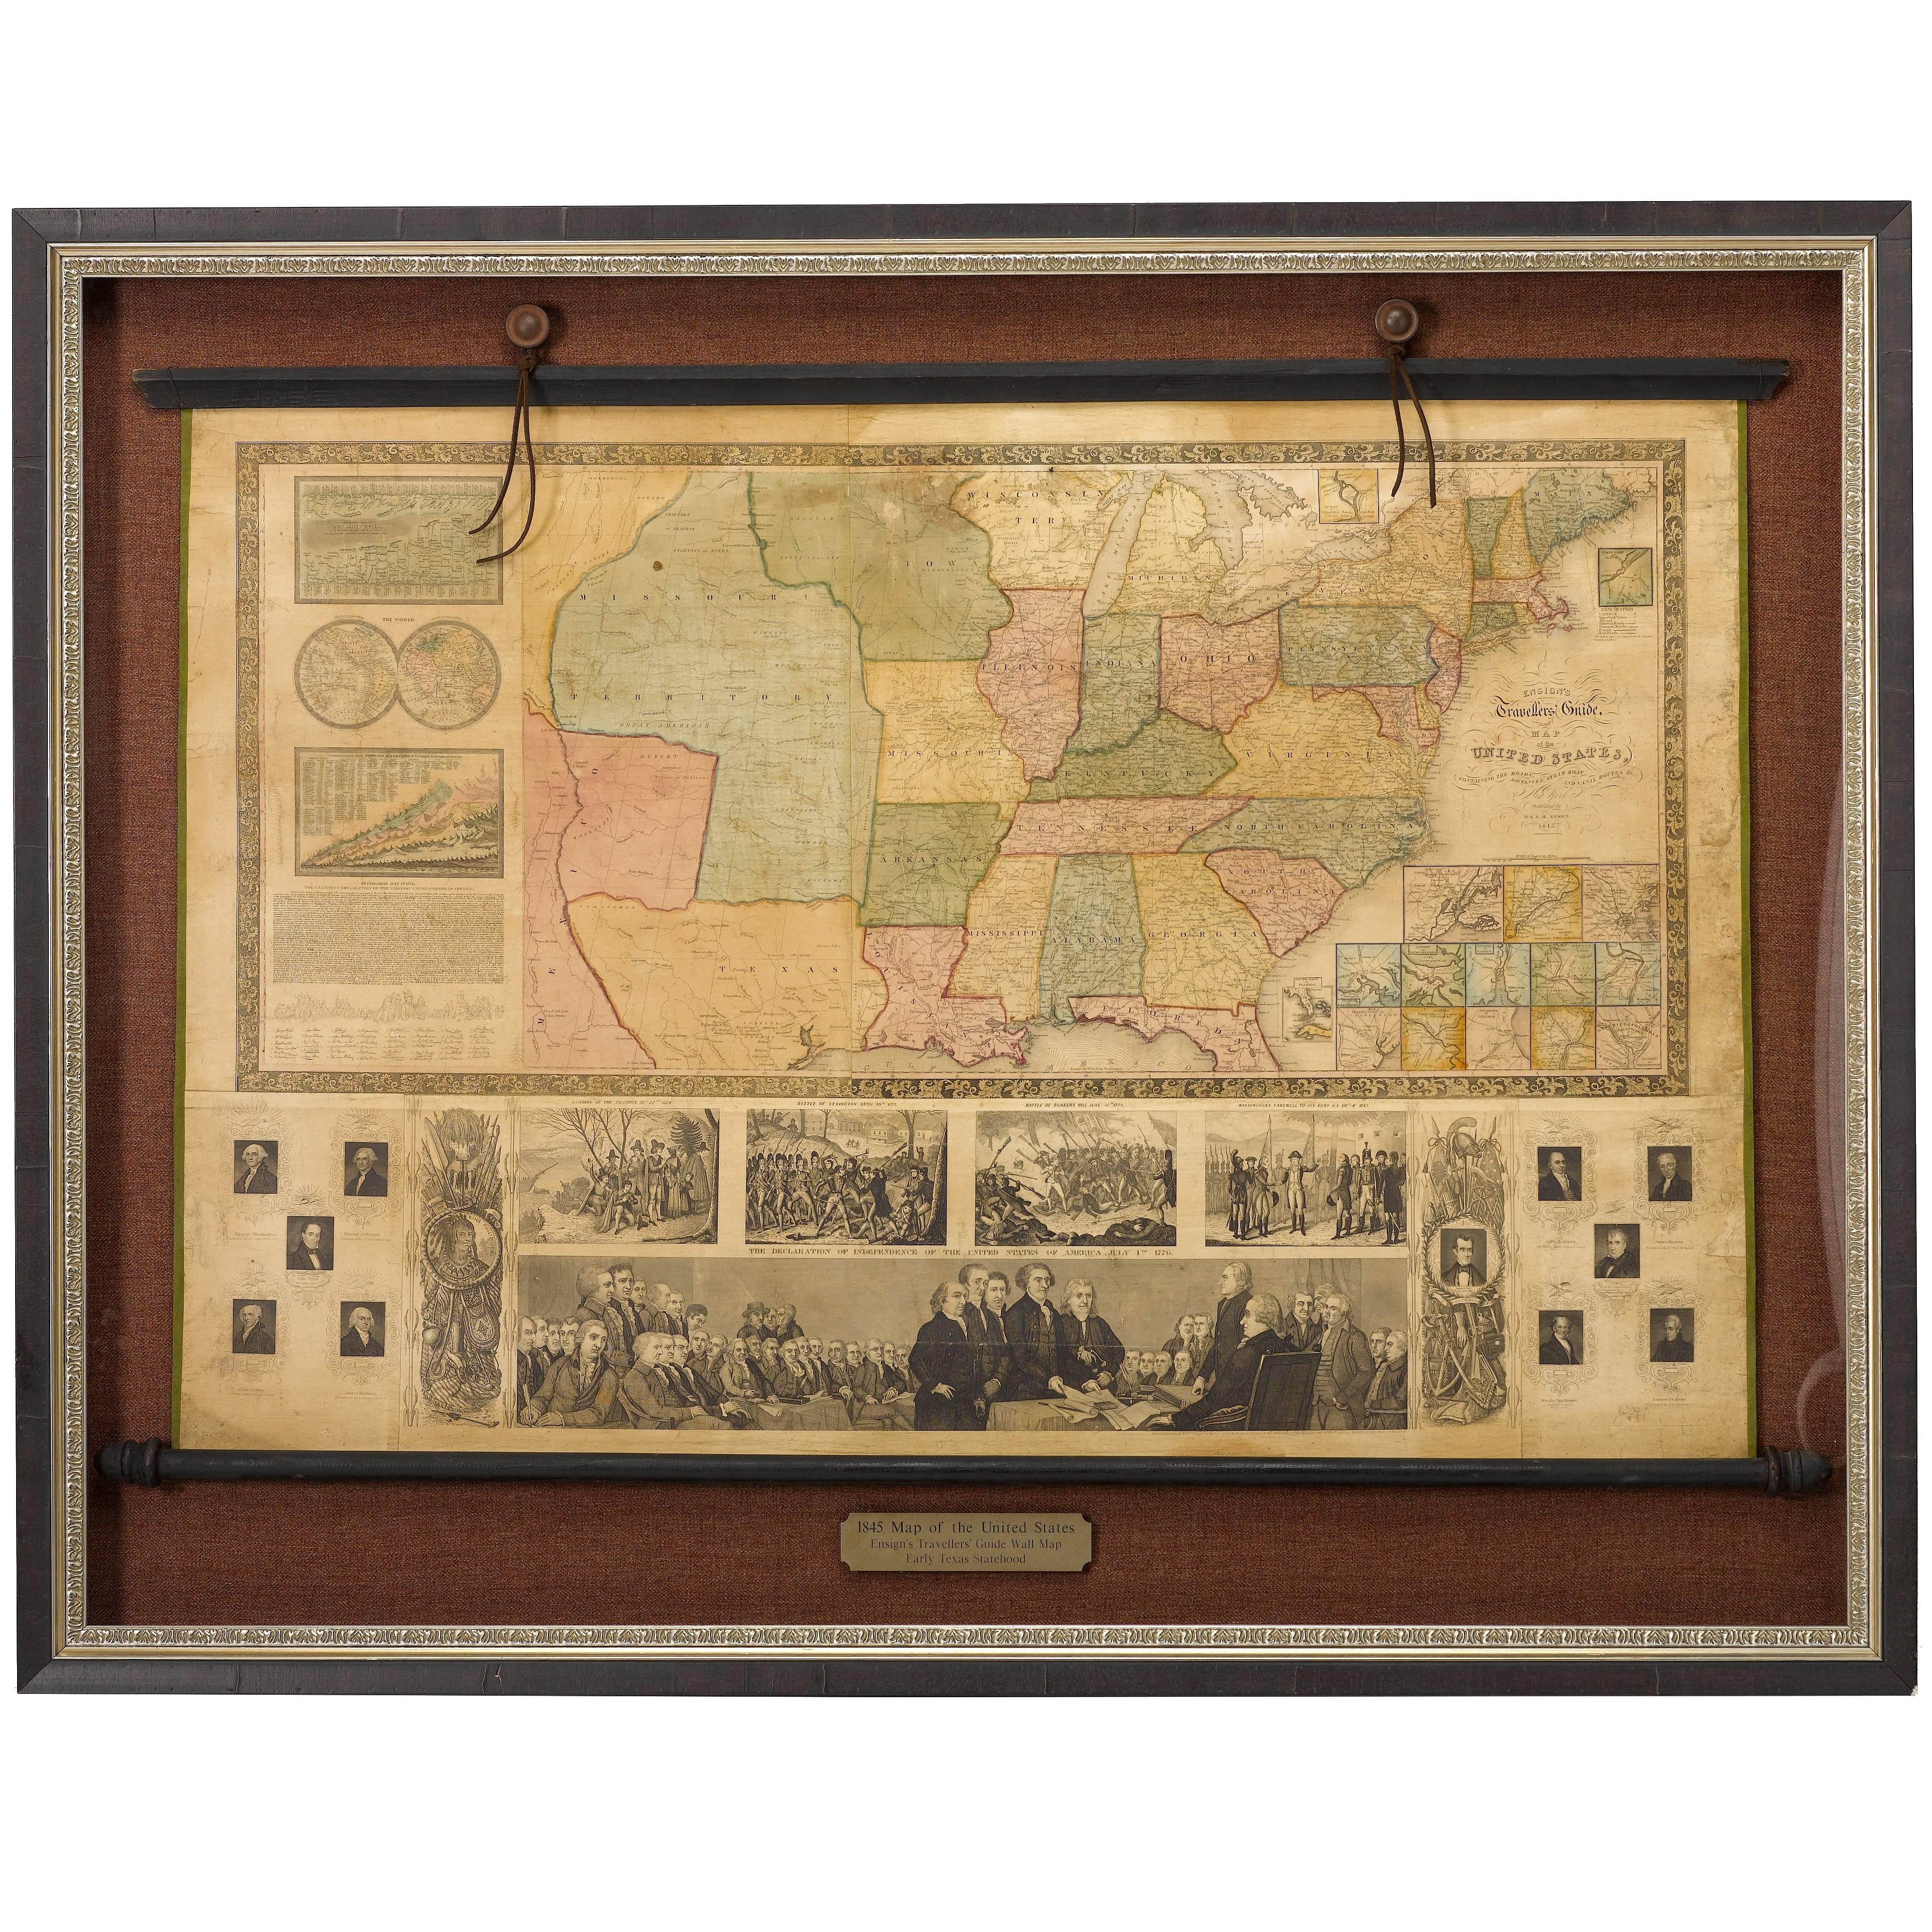 1845 United States Hanging Wall Map by T & E. H. Ensign